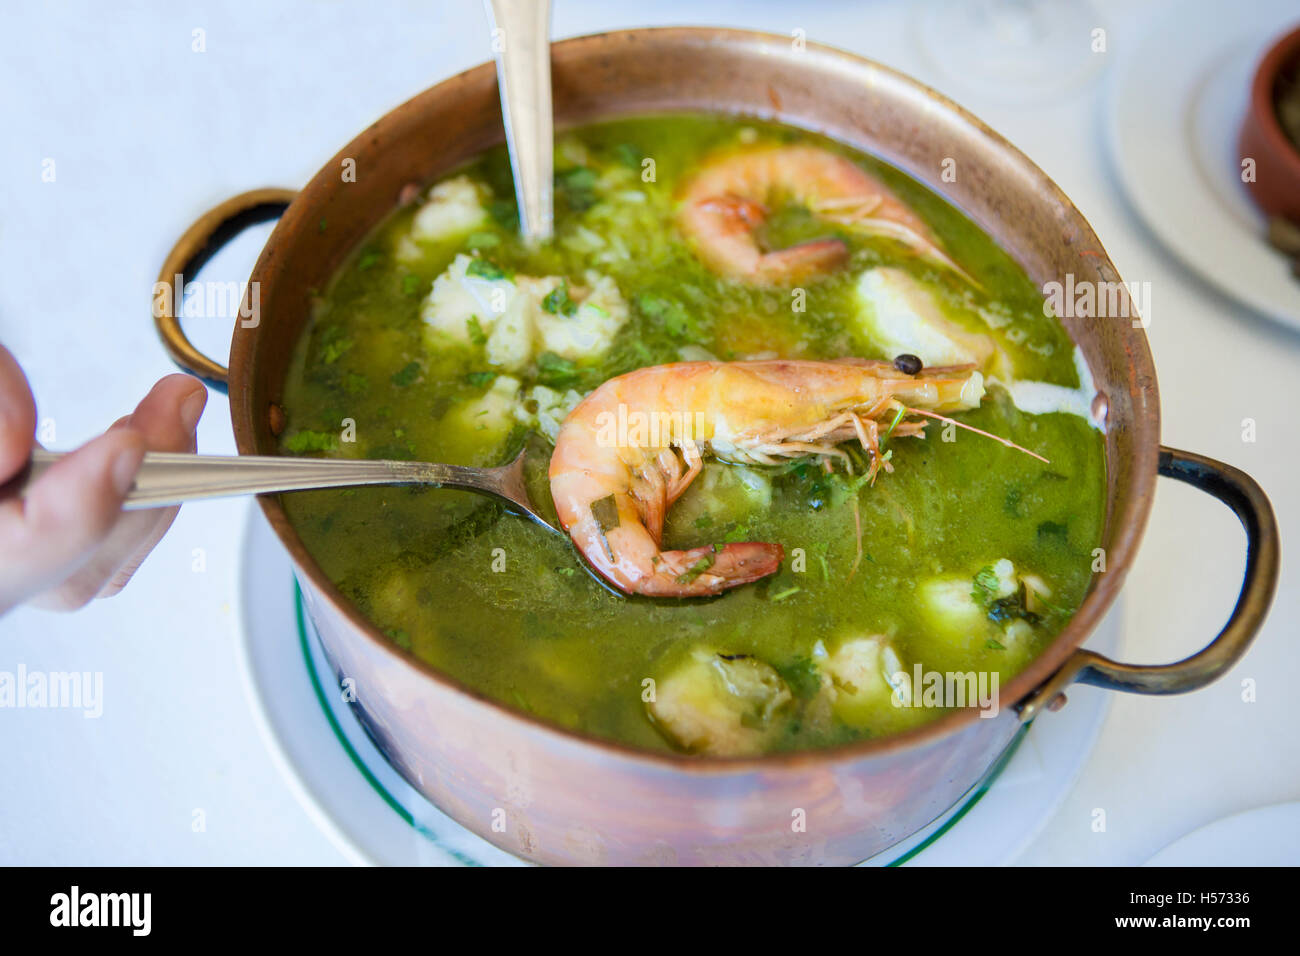 Arroz de Tamboril or soupy seafood rice, portuguese recipe. Hand holding the spoon with a prawn Stock Photo